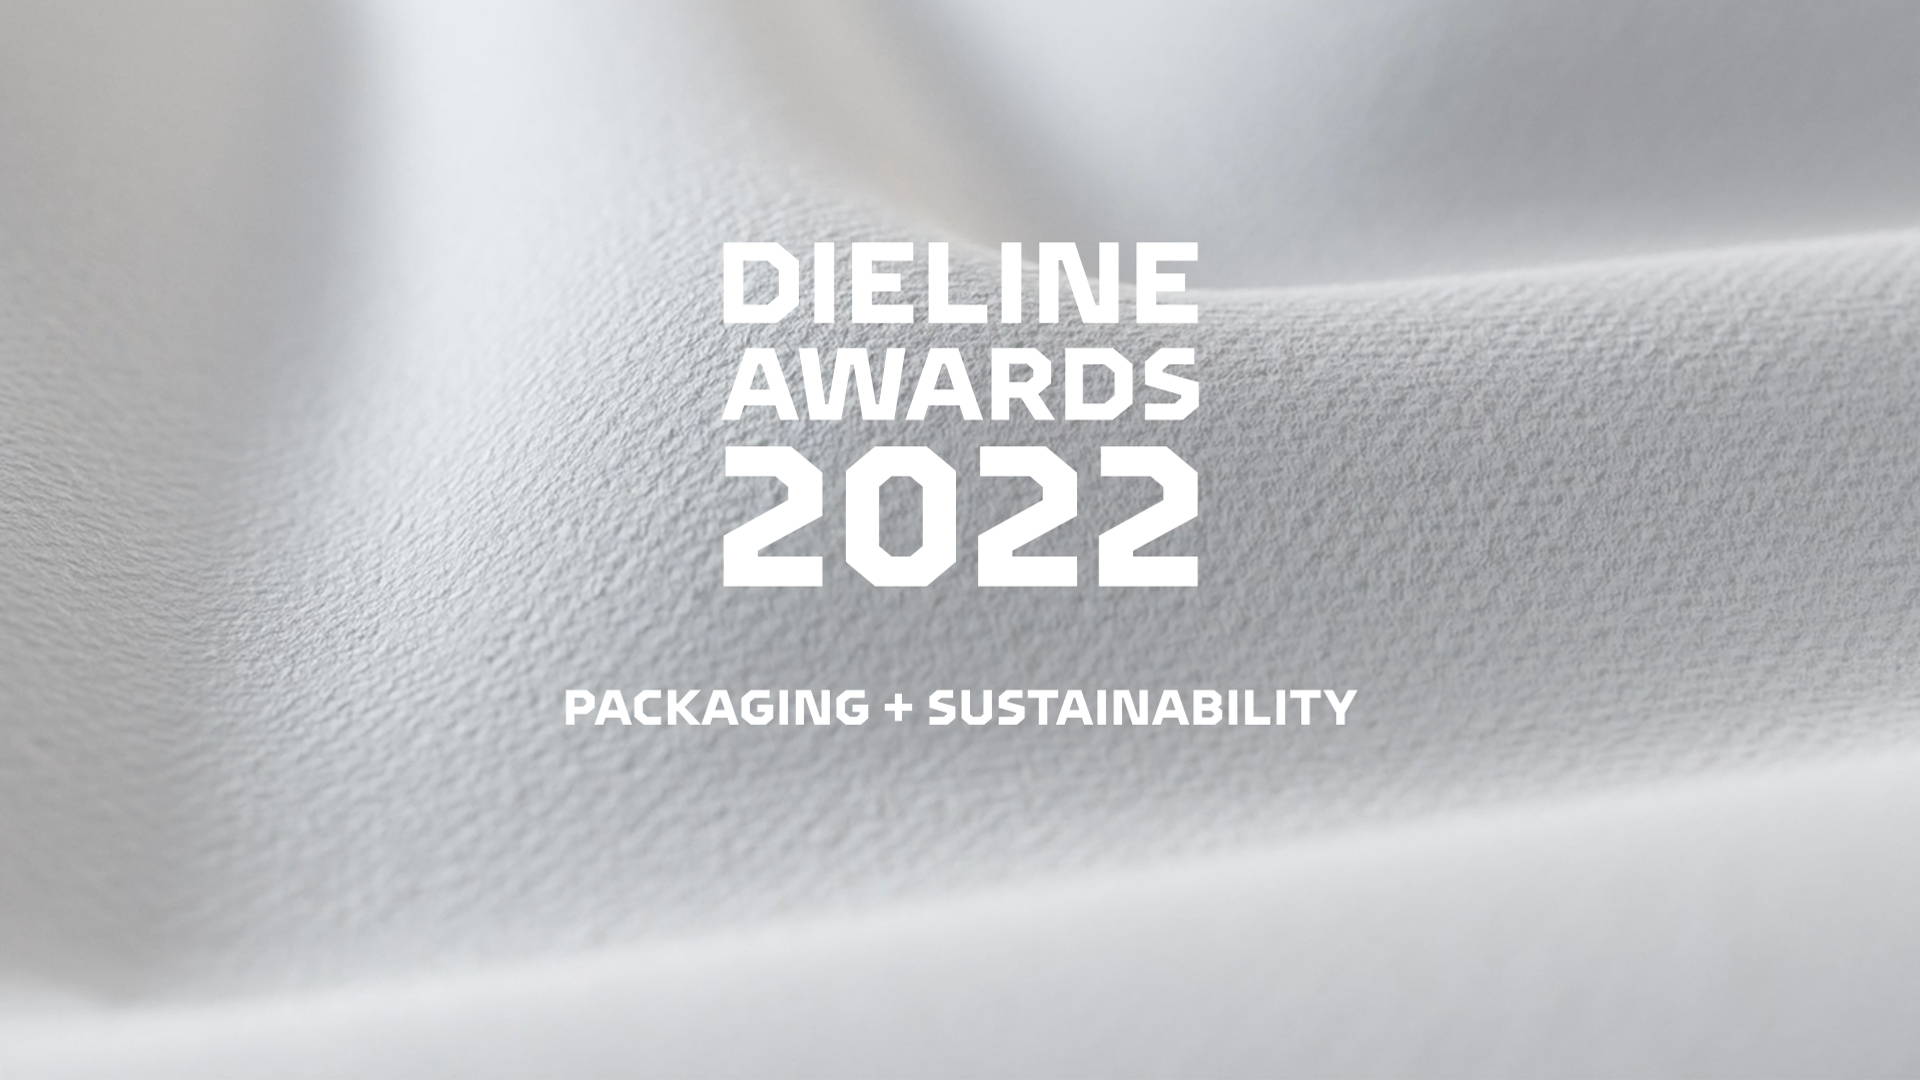 Featured image for DIELINE AWARDS: Packaging + Sustainability